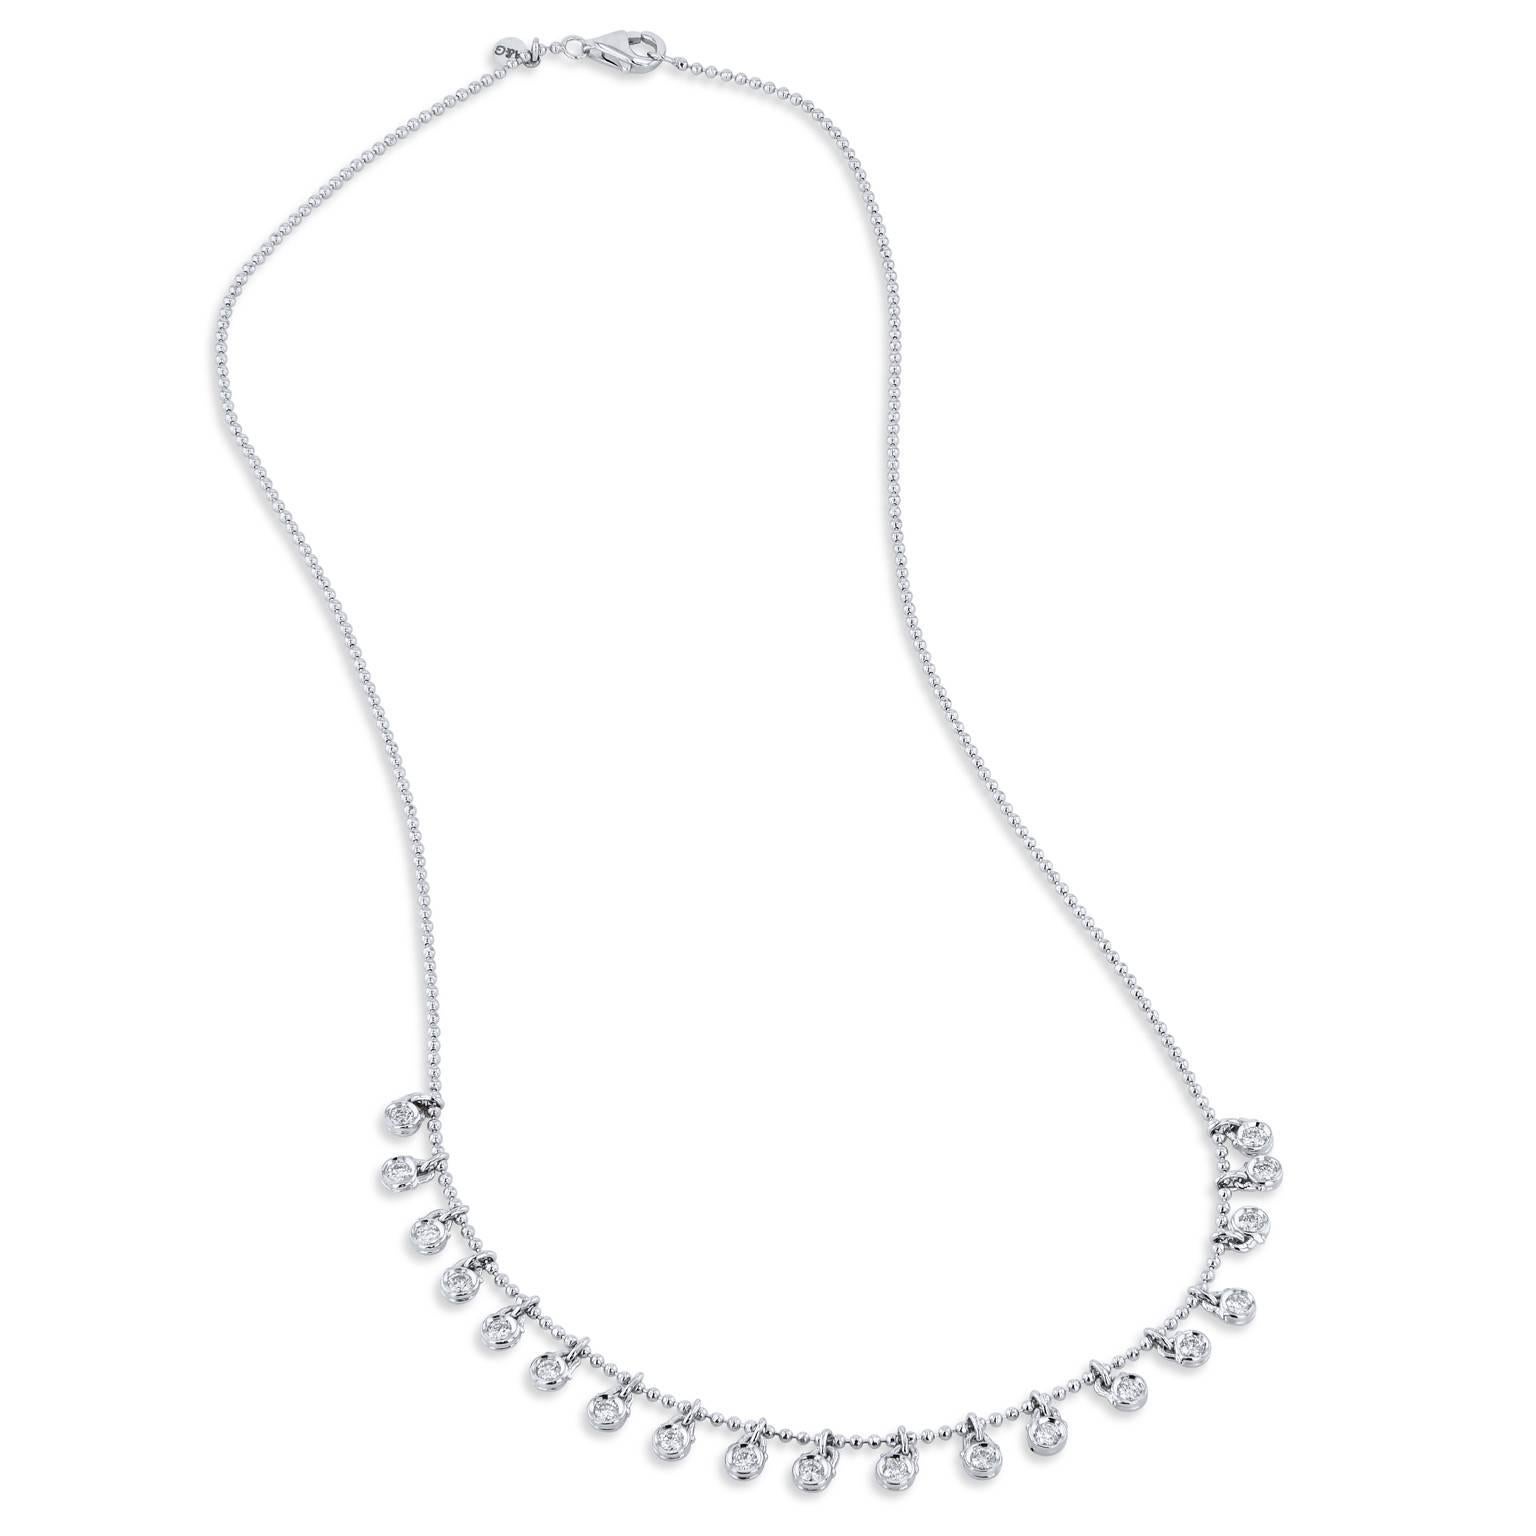 Exude flirty, fun with this 18 karat white gold necklace featuring nineteen bezel-set drop diamonds on swivel. Strung on 16.5 inch chain, embrace the glimmer and shine.